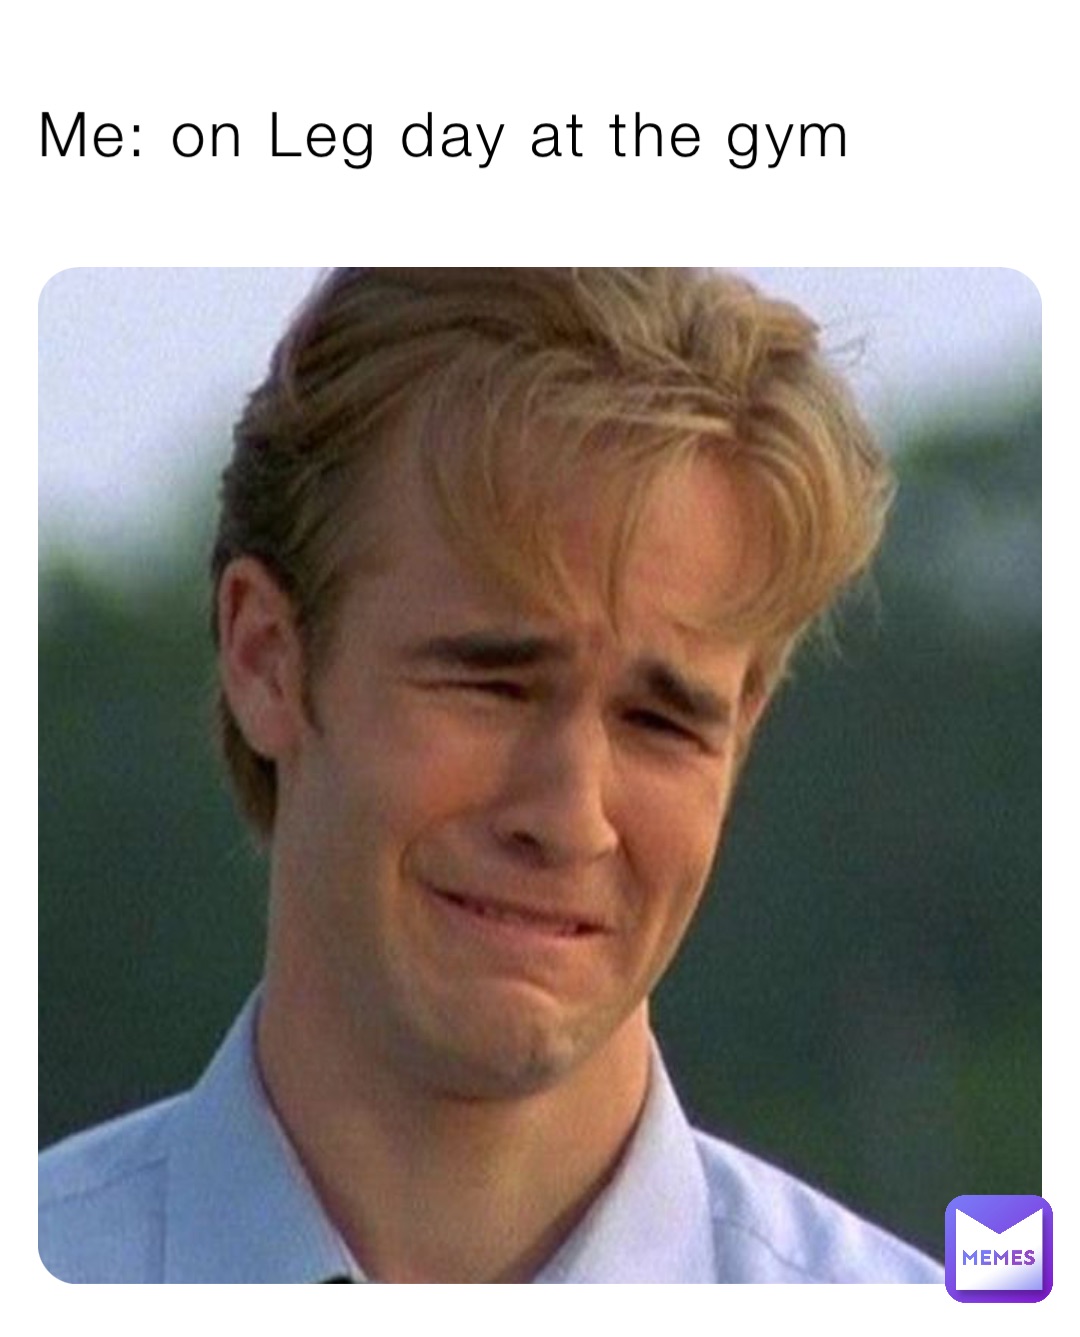 Me: on Leg day at the gym